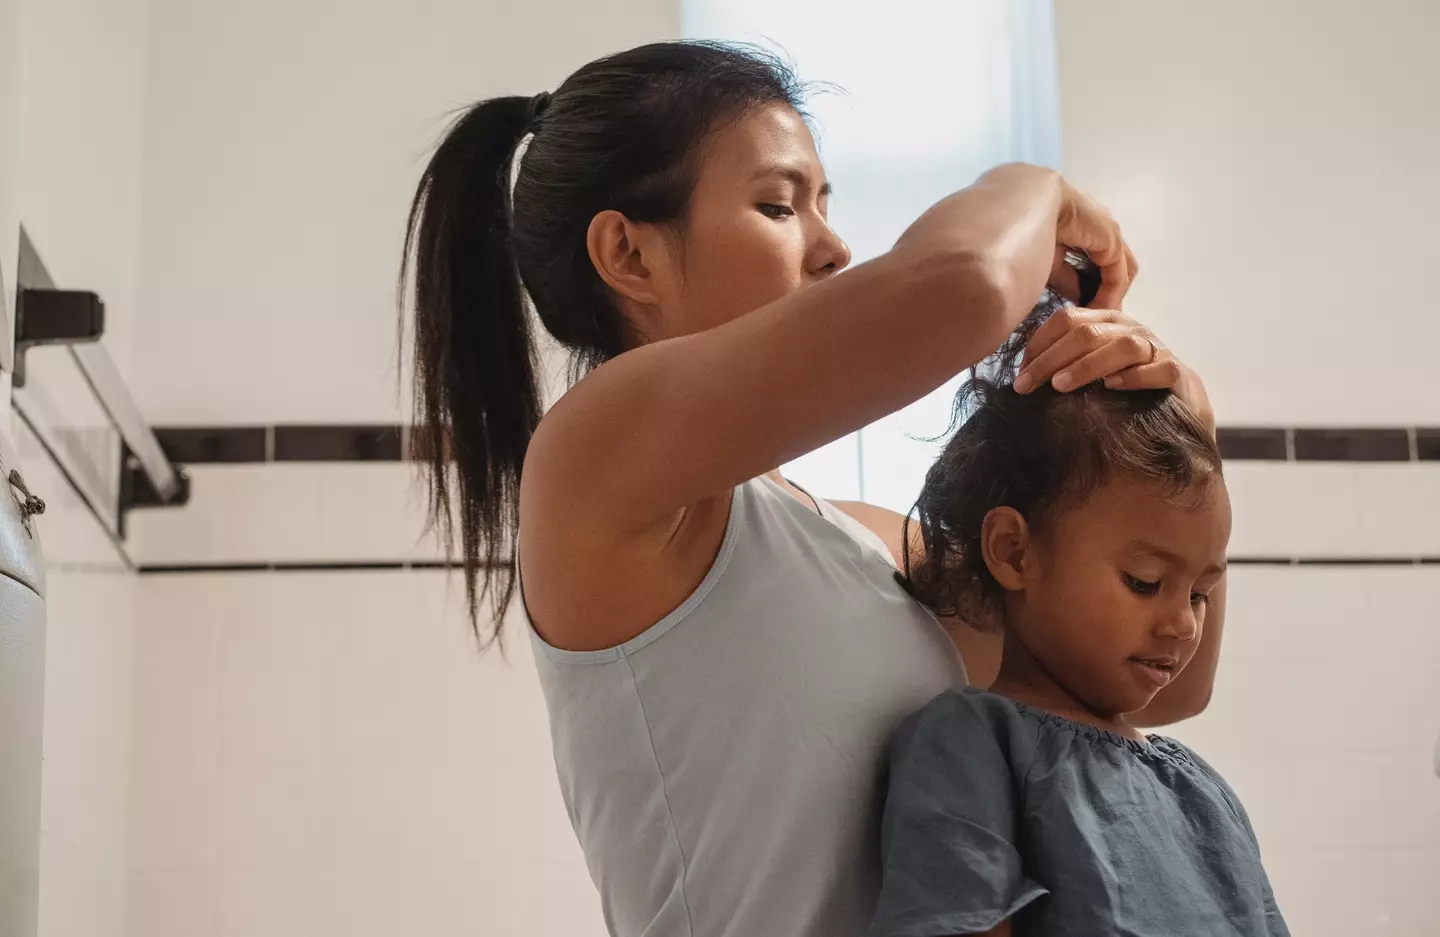 The mum said she takes good care of her daughter’s hair (stock image).